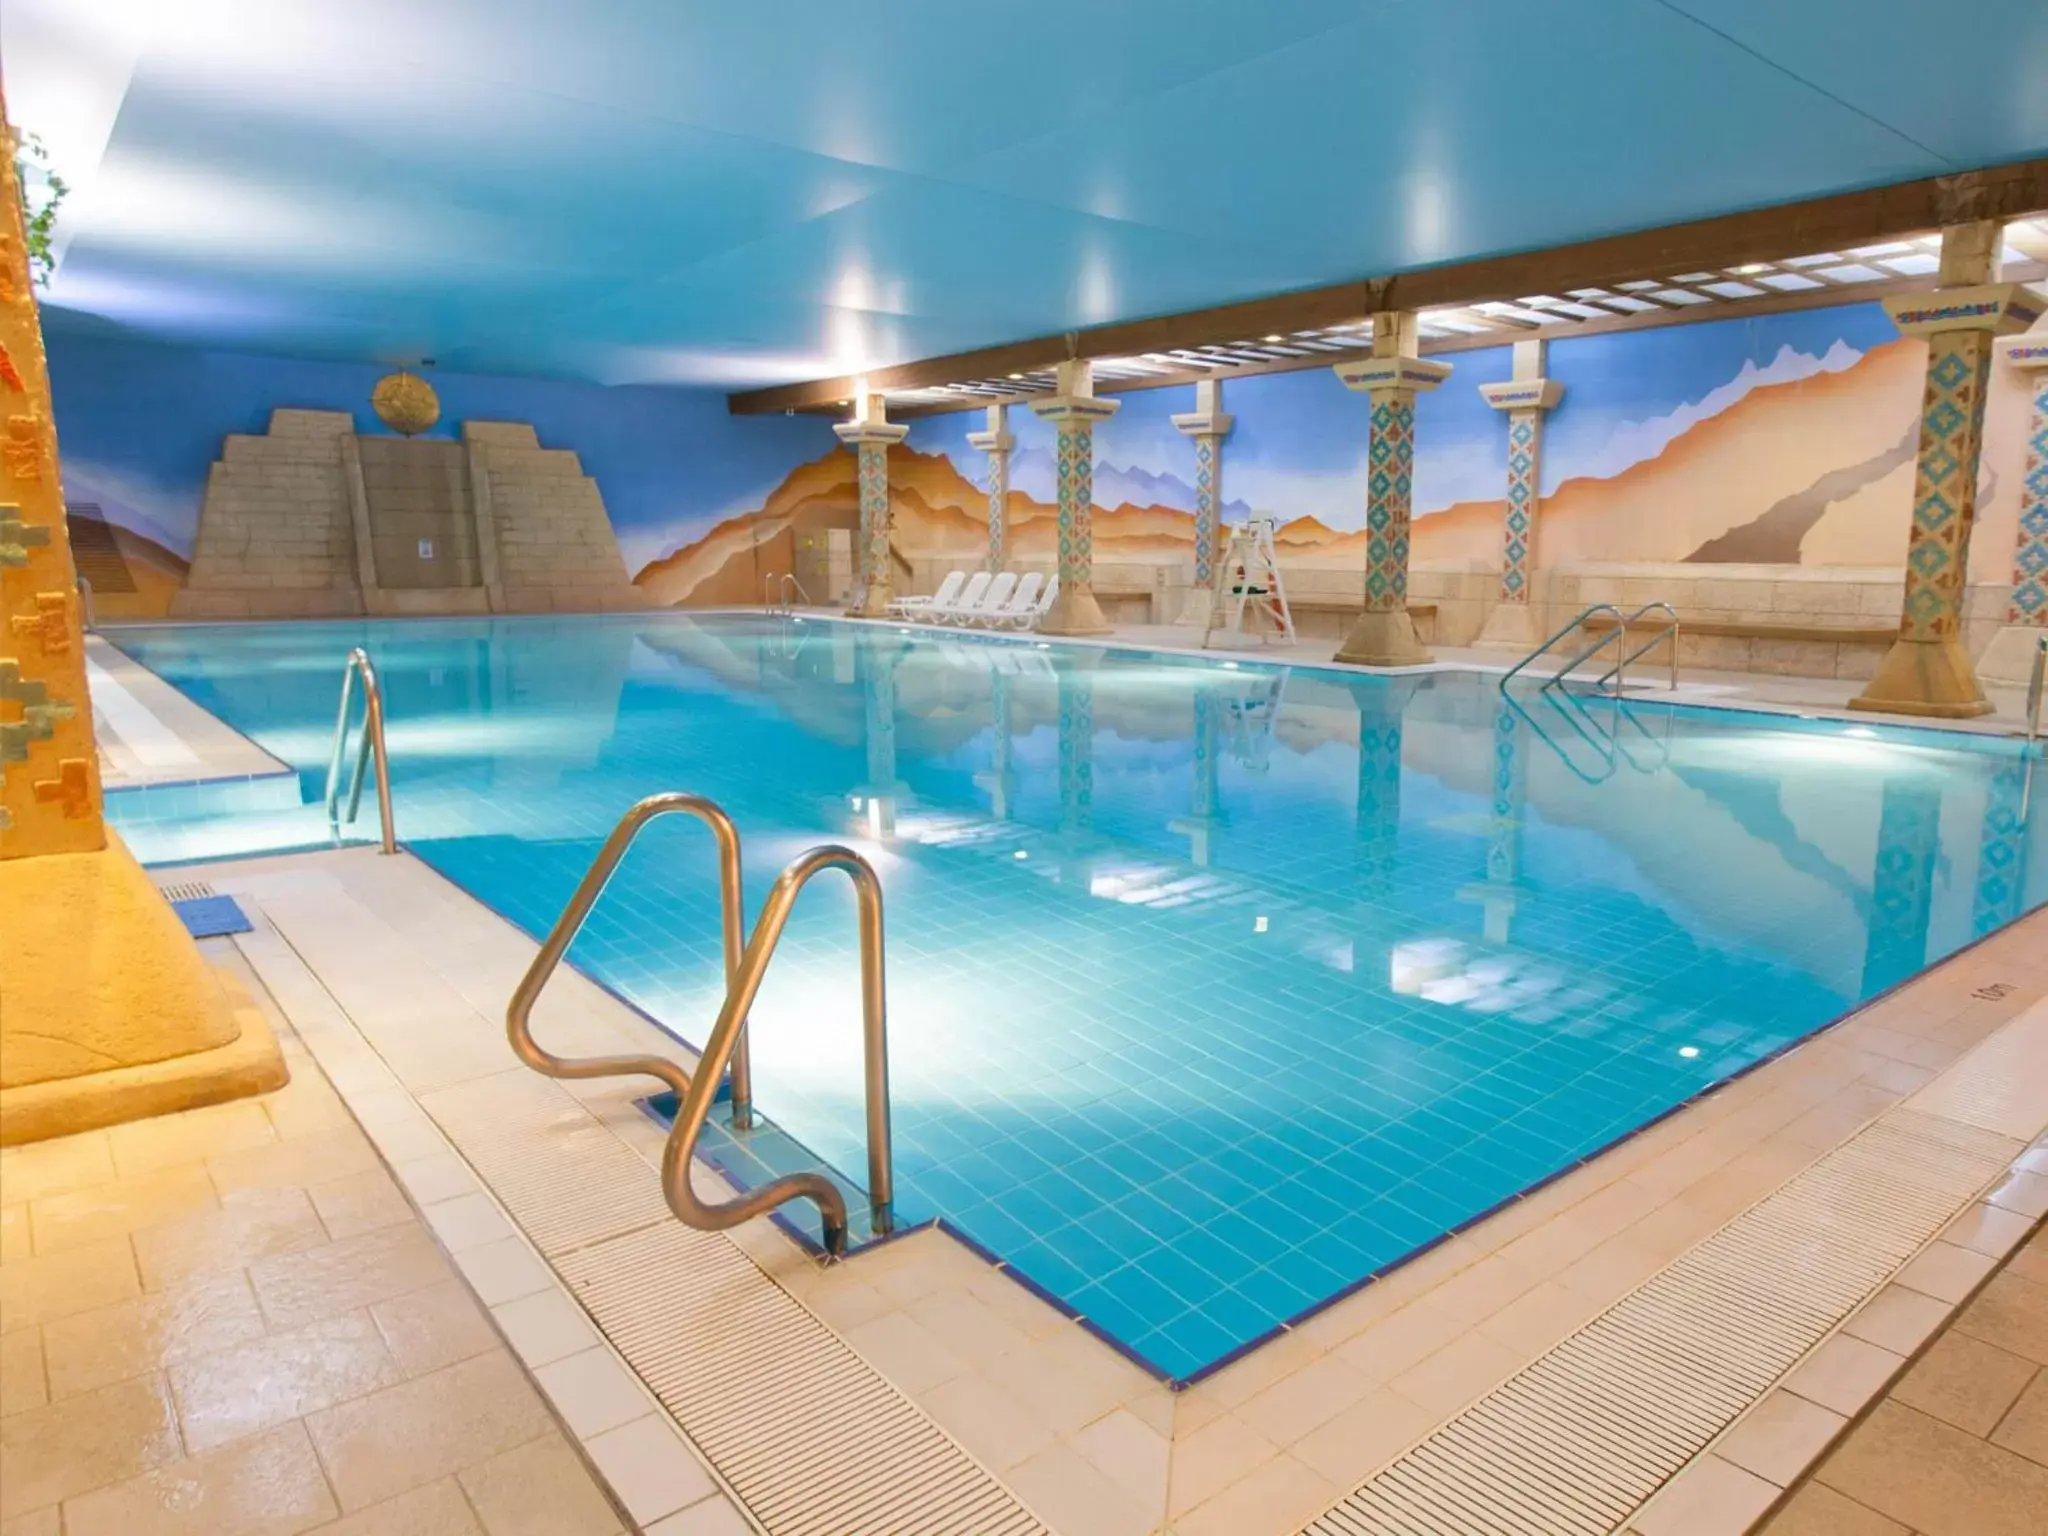 Swimming Pool in TLH Derwent Hotel - TLH Leisure, Entertainment and Spa Resort